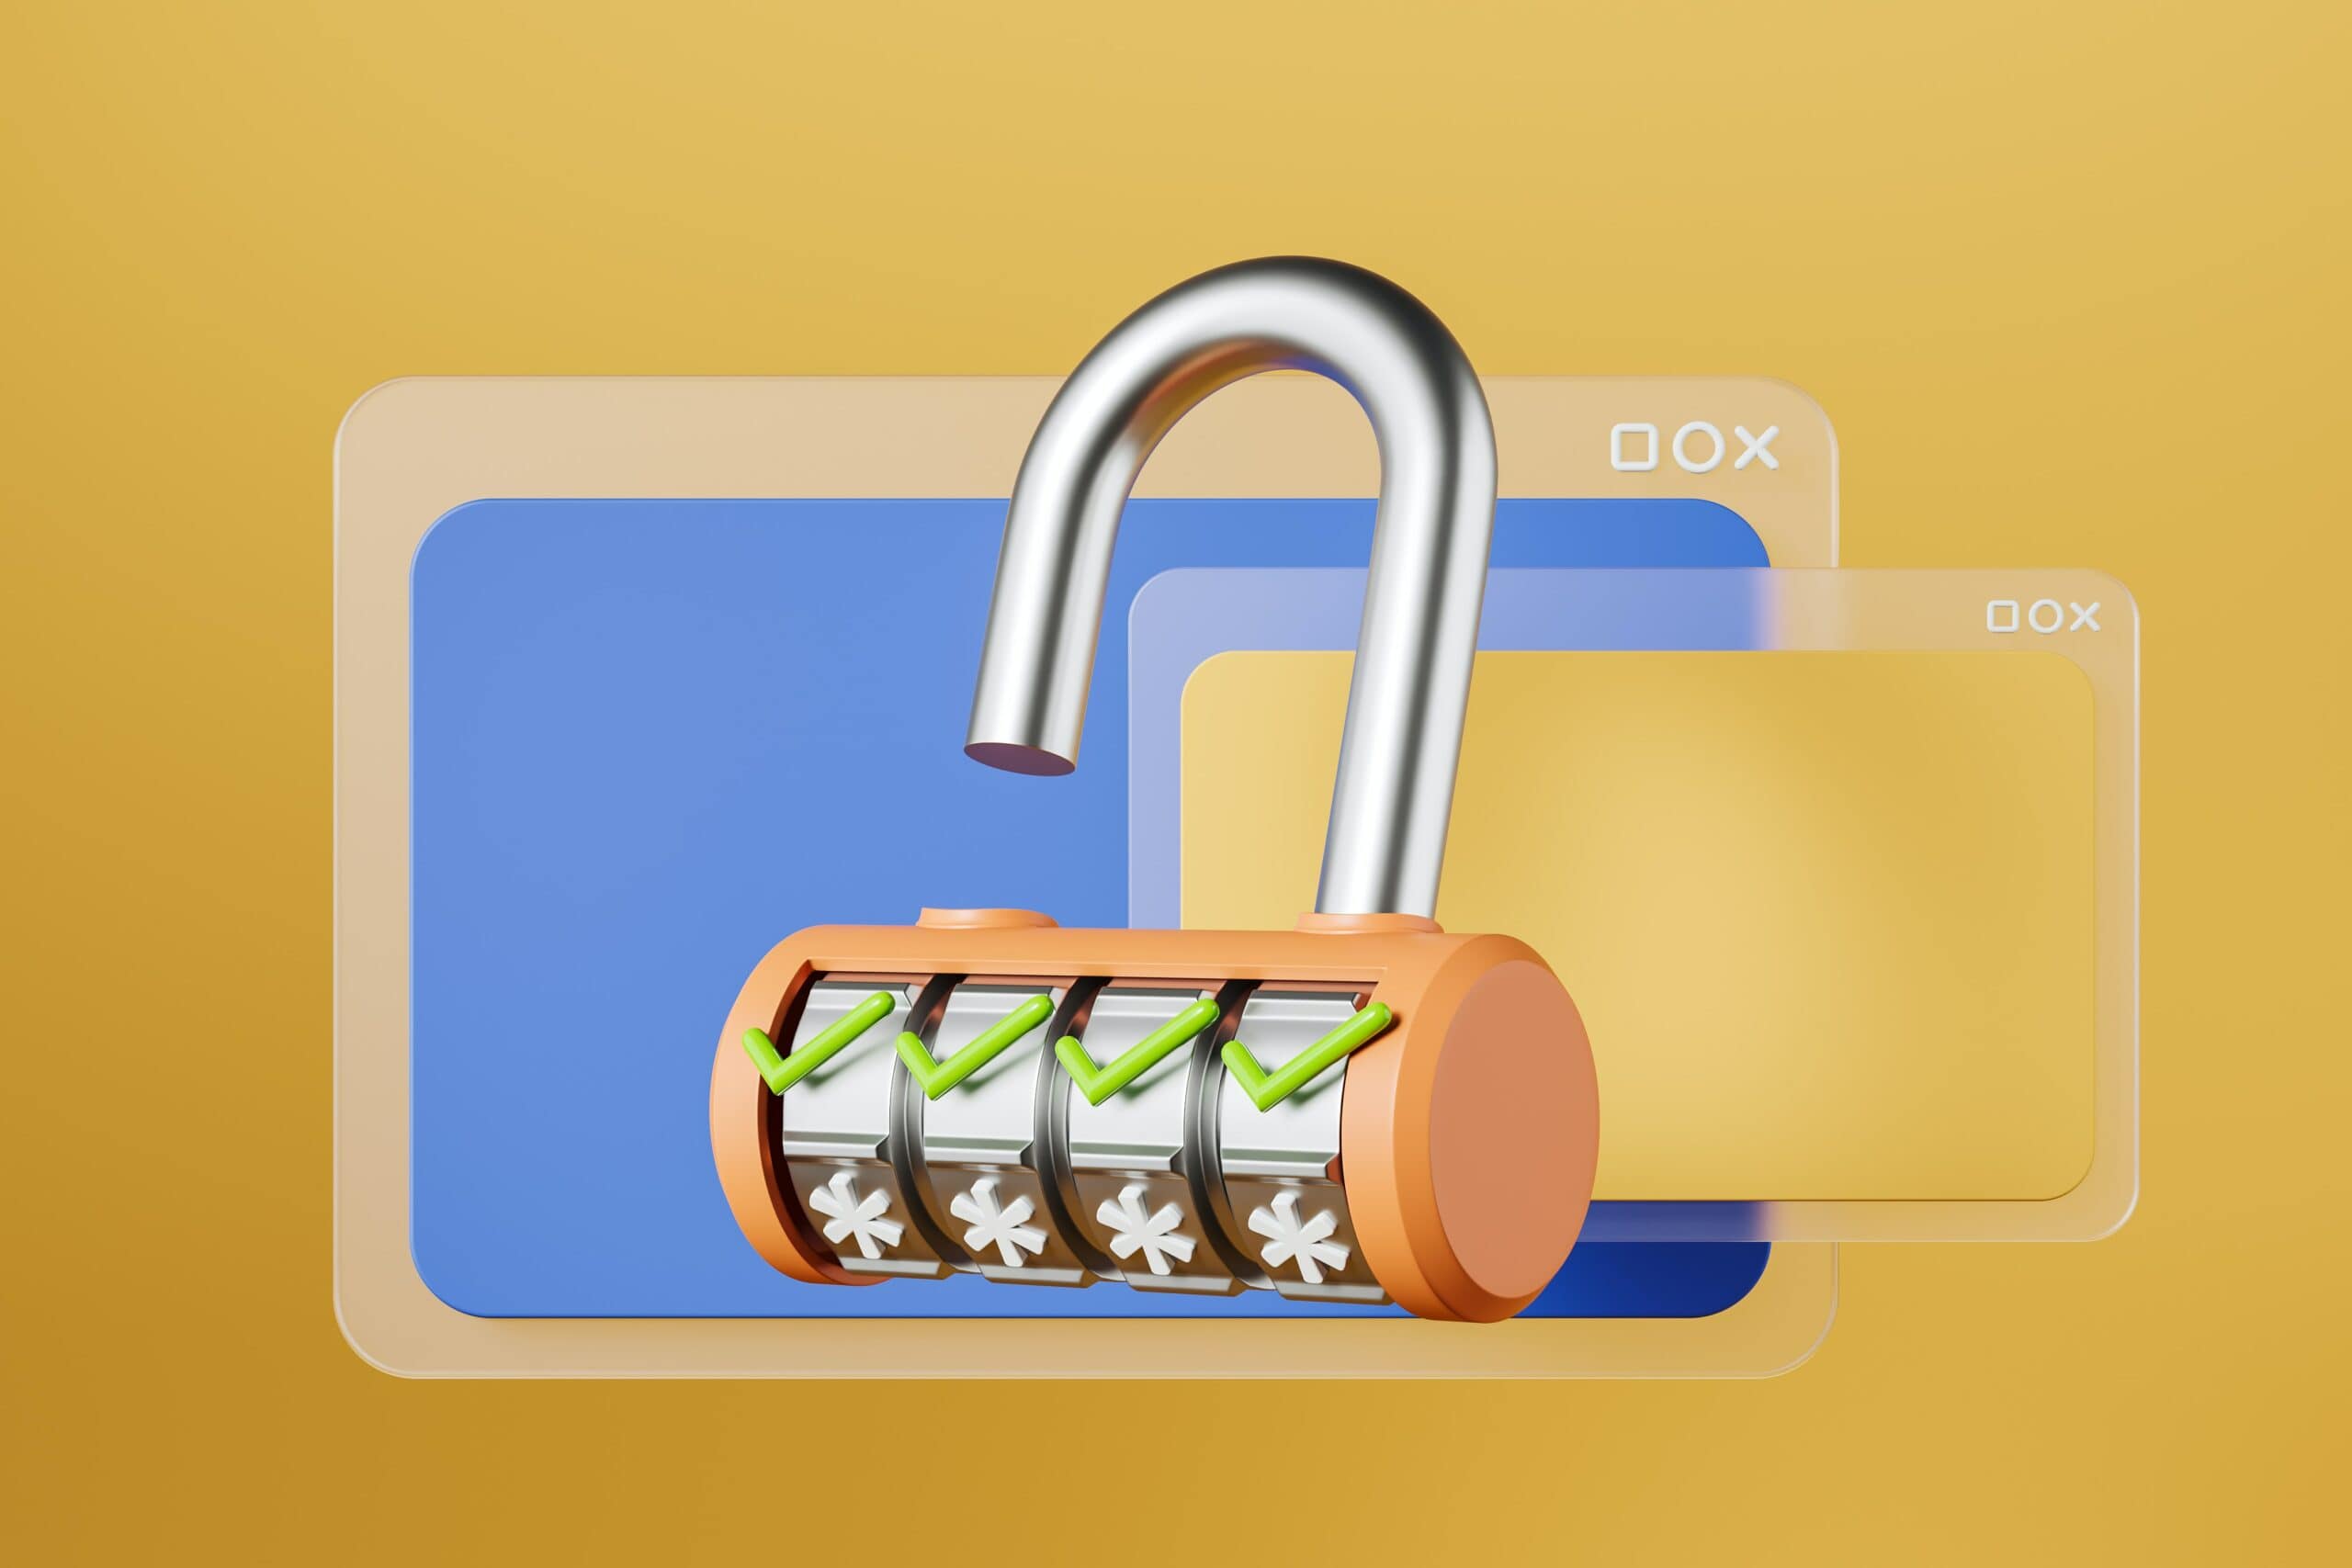 An image of a padlock on a yellow background illustrating secure password protection.